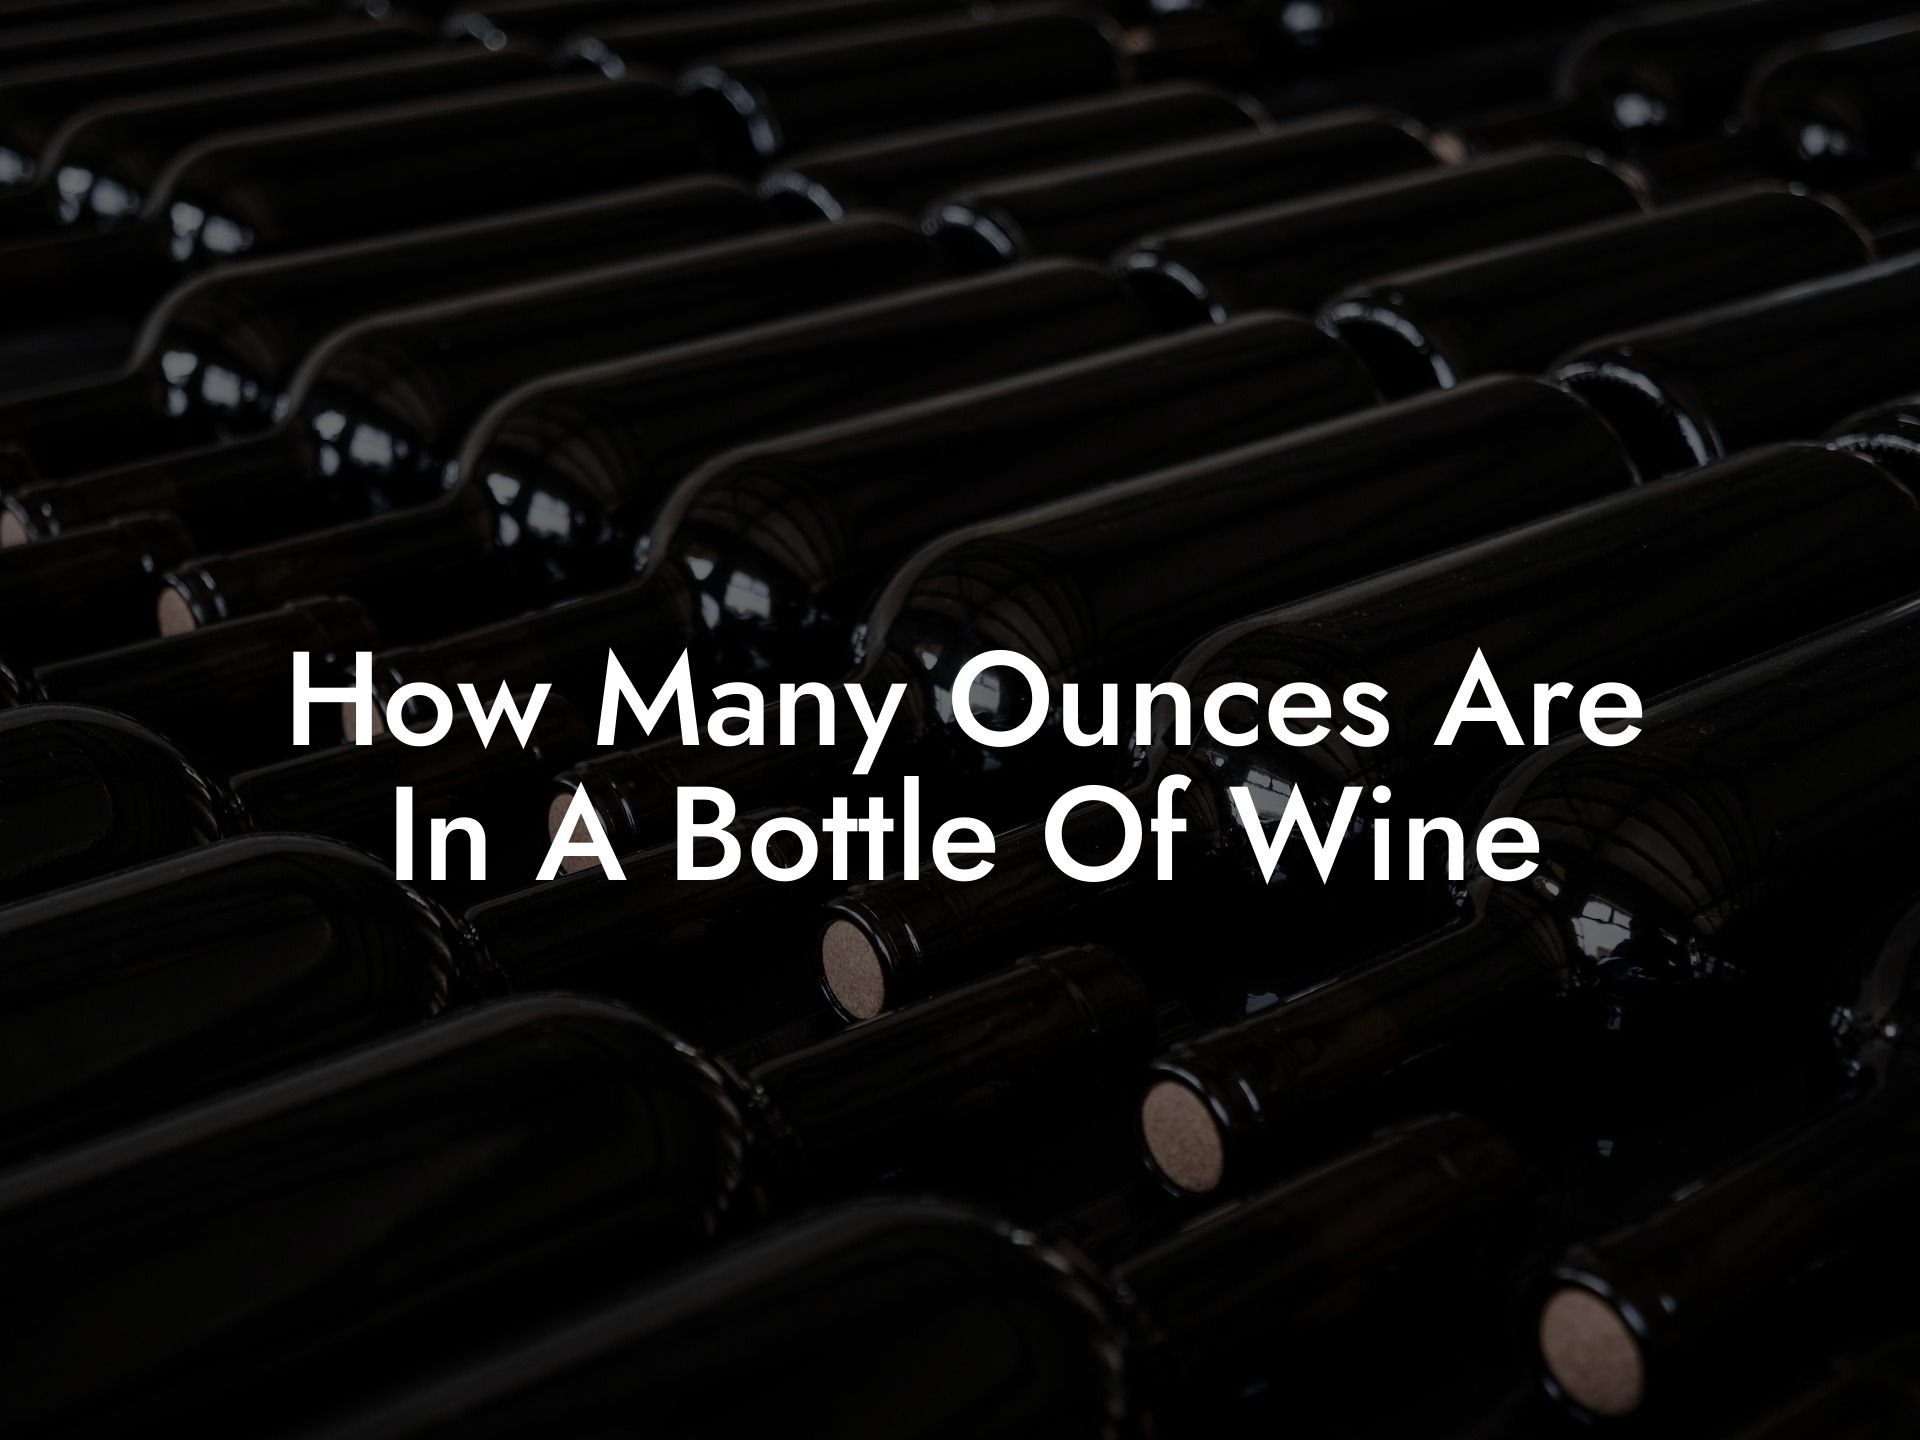 How Many Ounces Are In A Bottle Of Wine